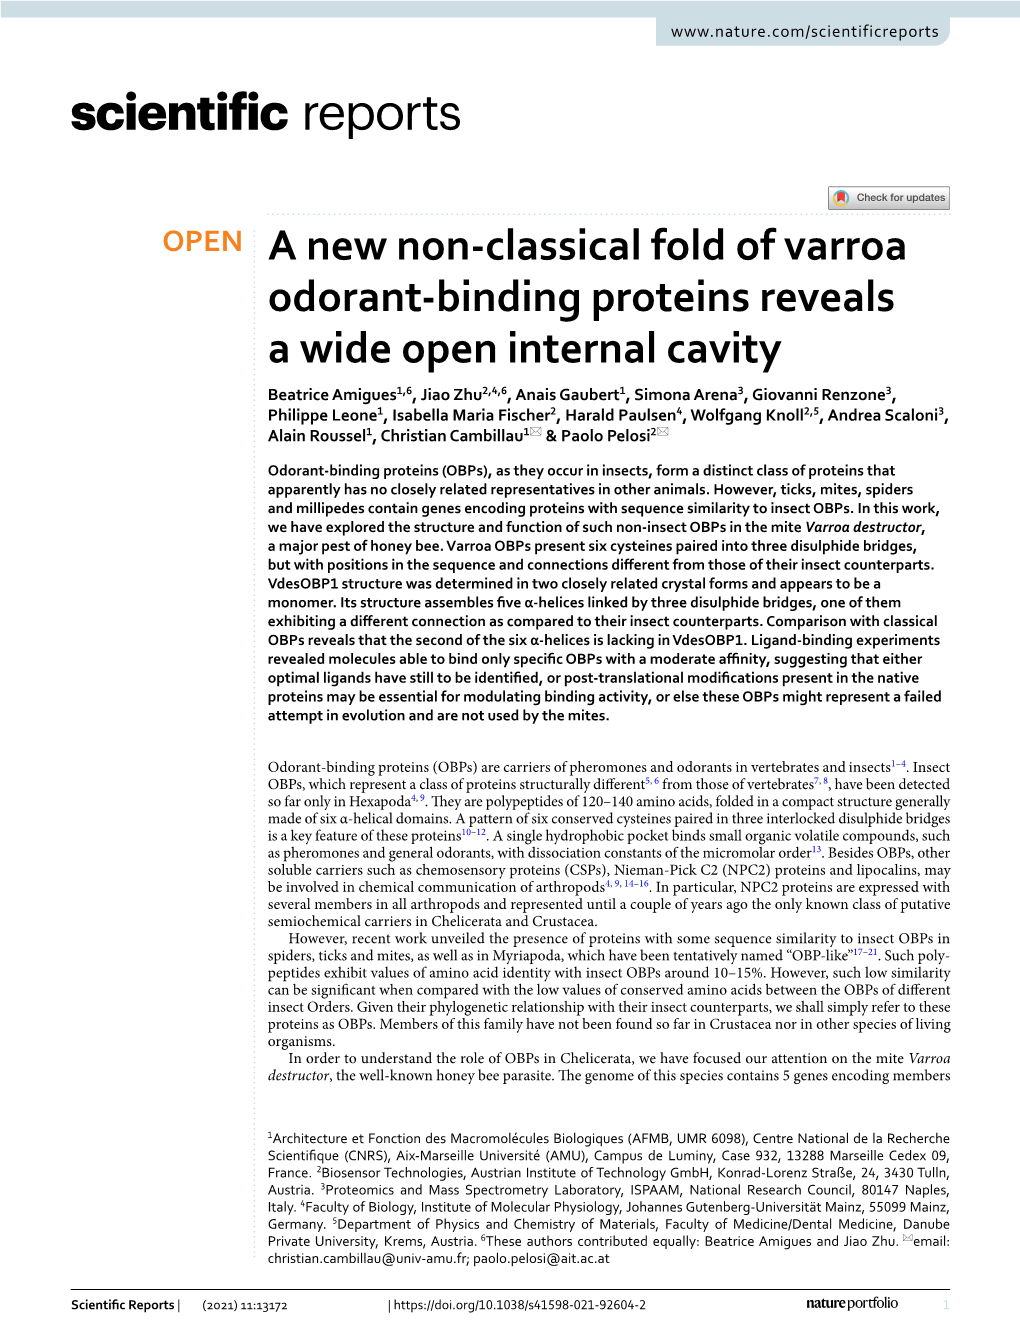 A New Non-Classical Fold of Varroa Odorant-Binding Proteins Reveals a Wide Open Internal Cavity